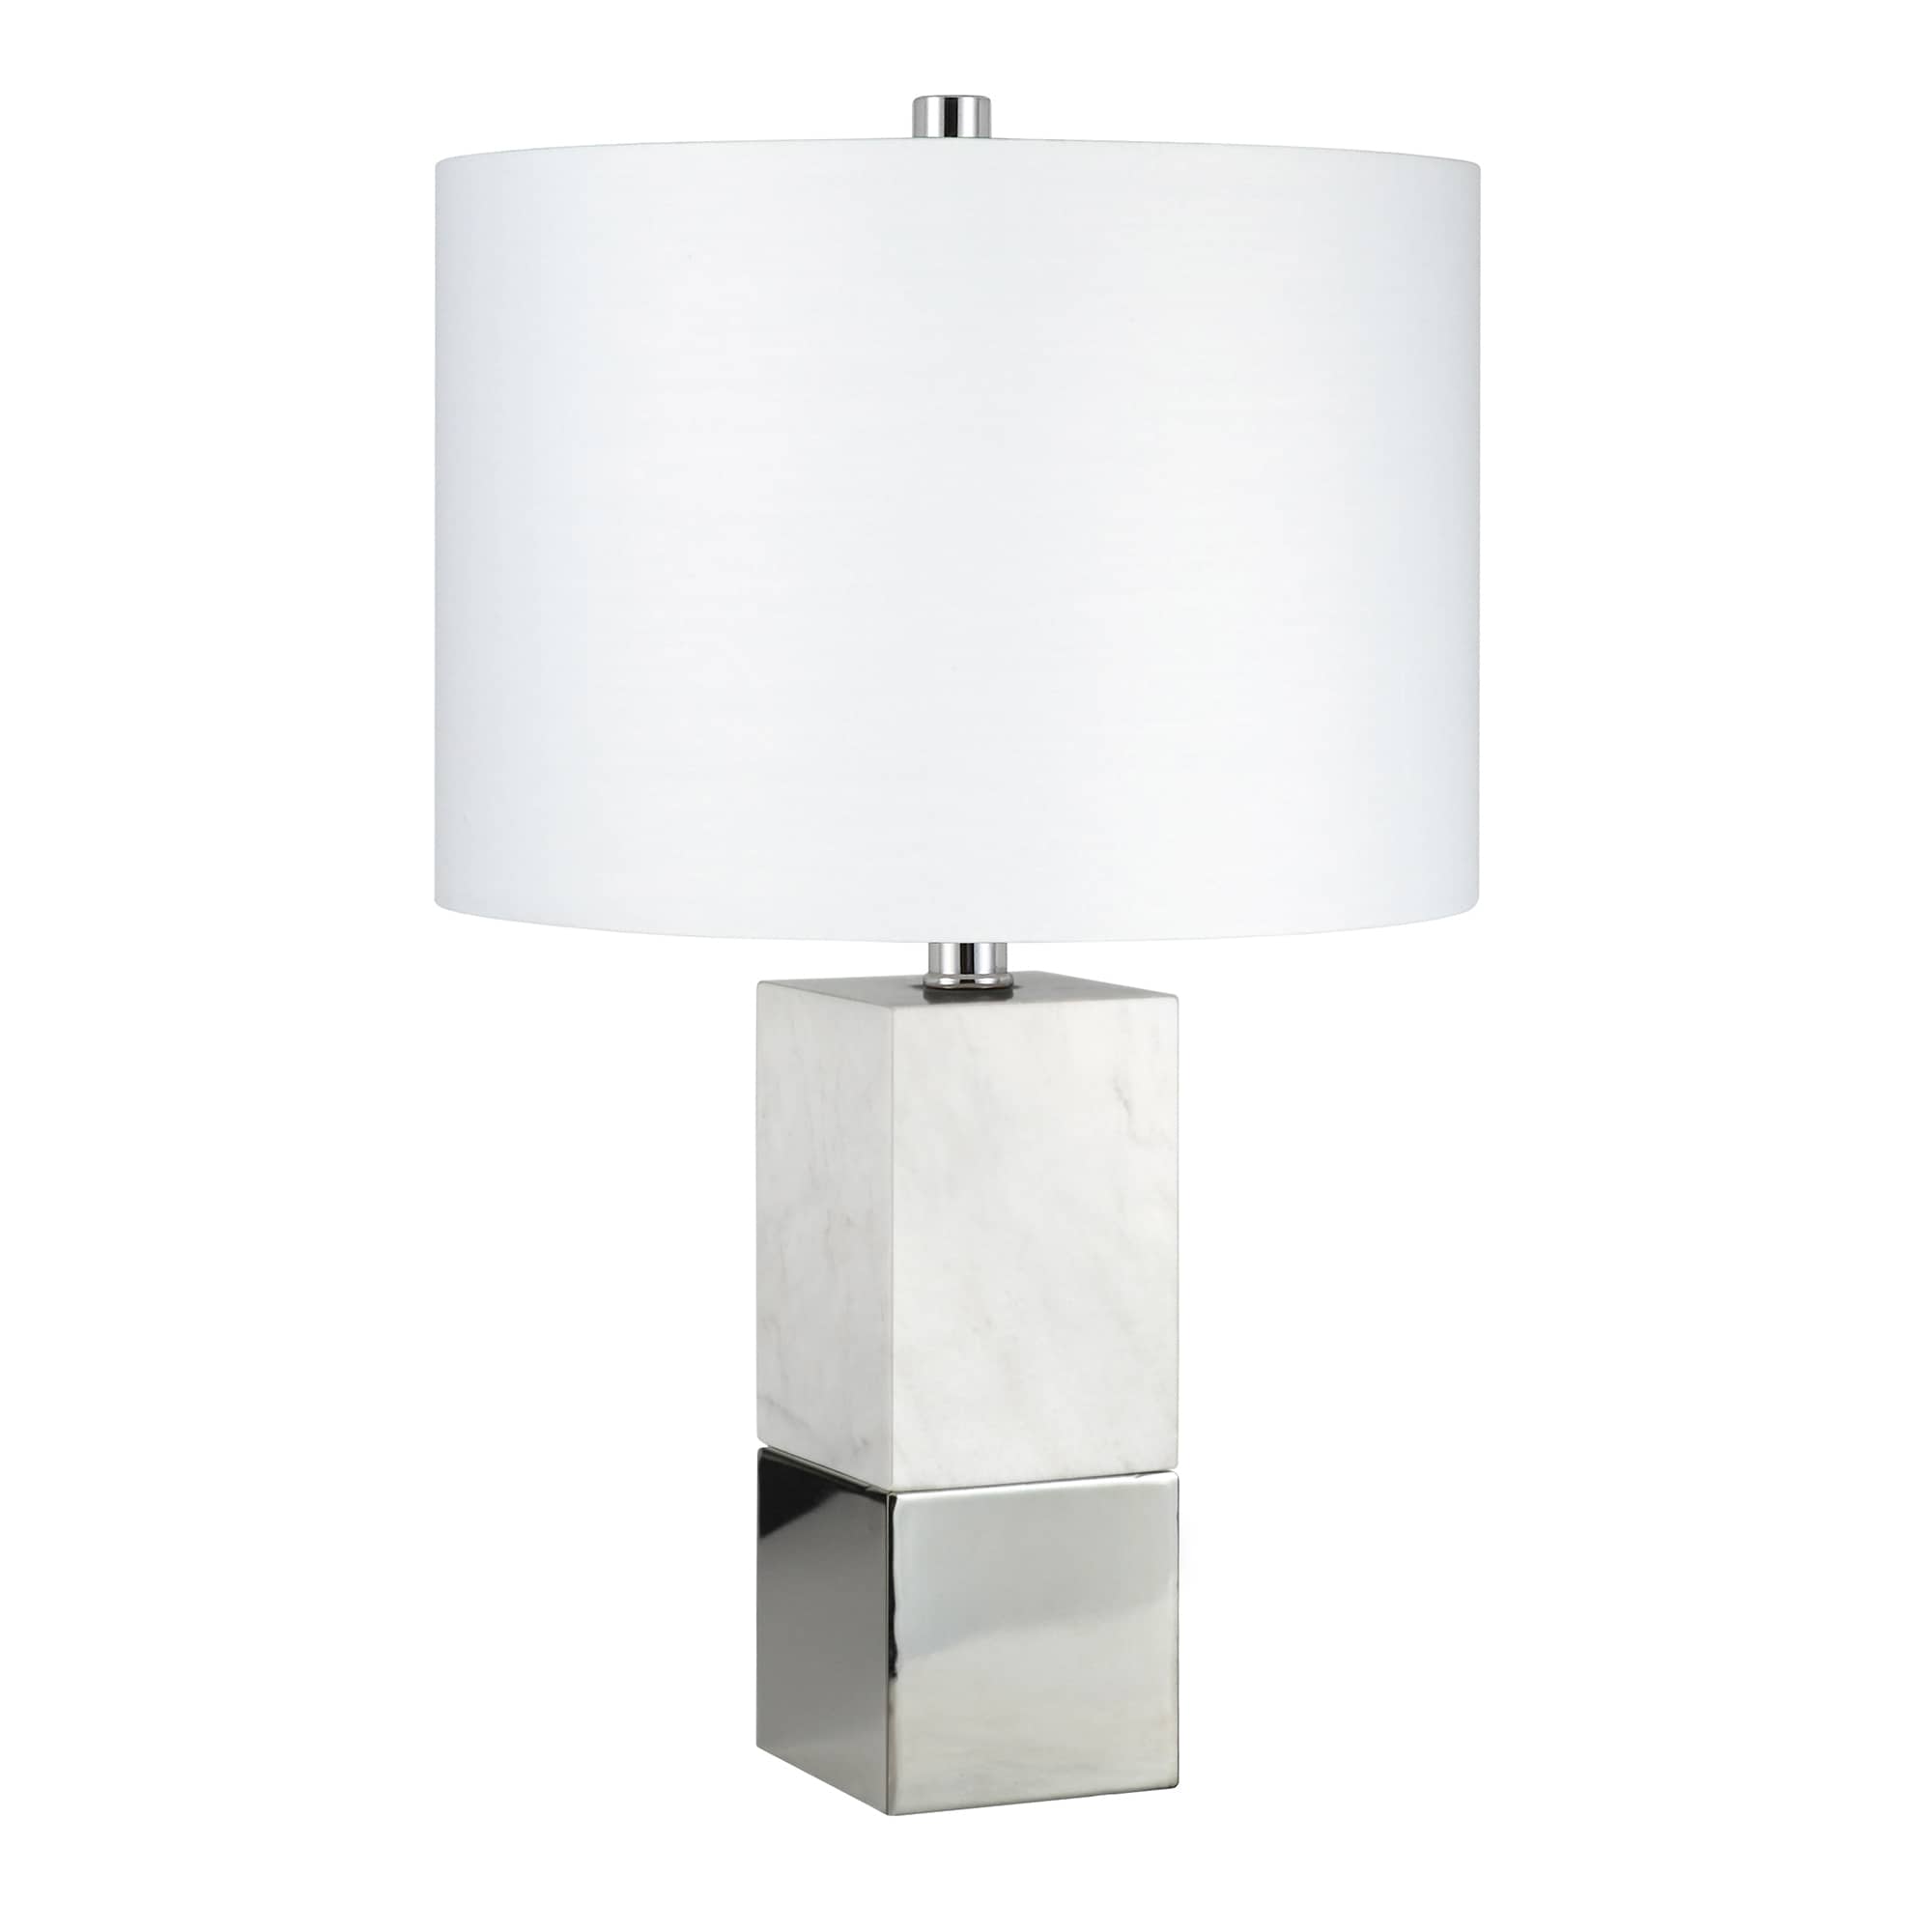 Marble Polished Nickel Led Table Lamp, How To Put A Table Lamp Together